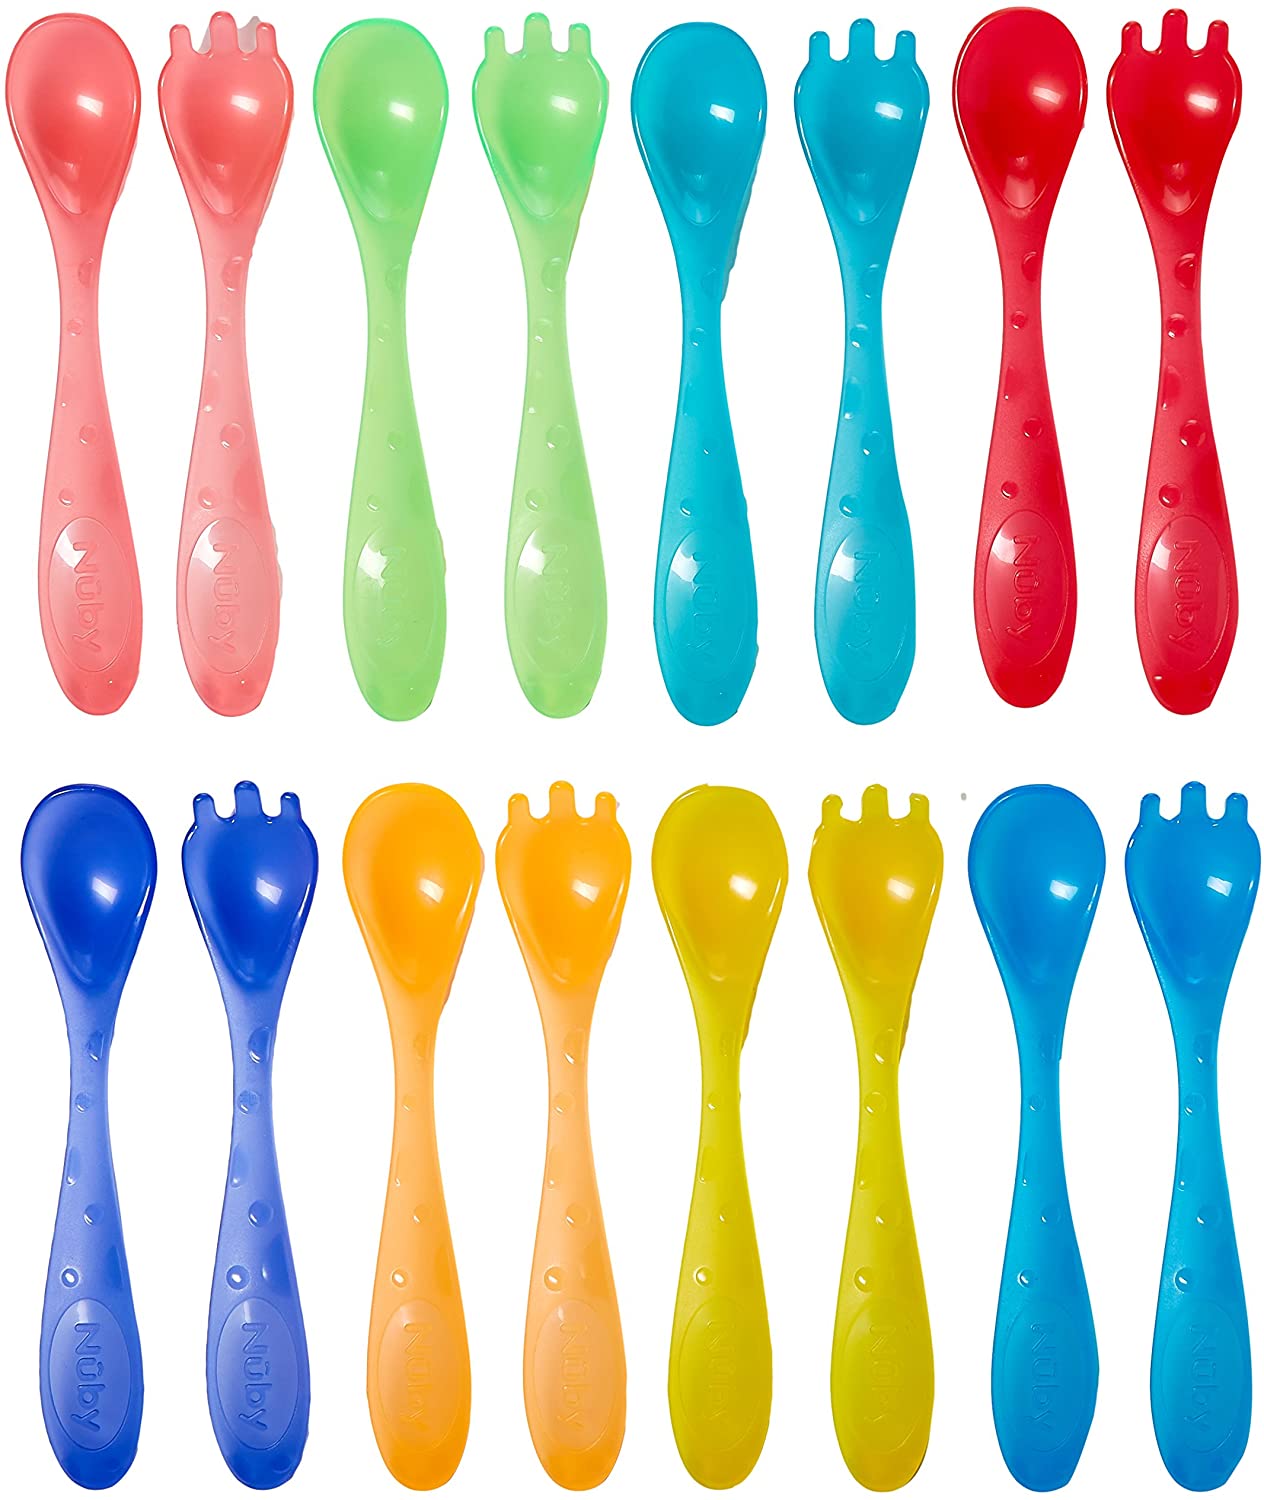 Nuby 16 Piece Wash or Toss Toddler Feeding Fork and Spoon Set